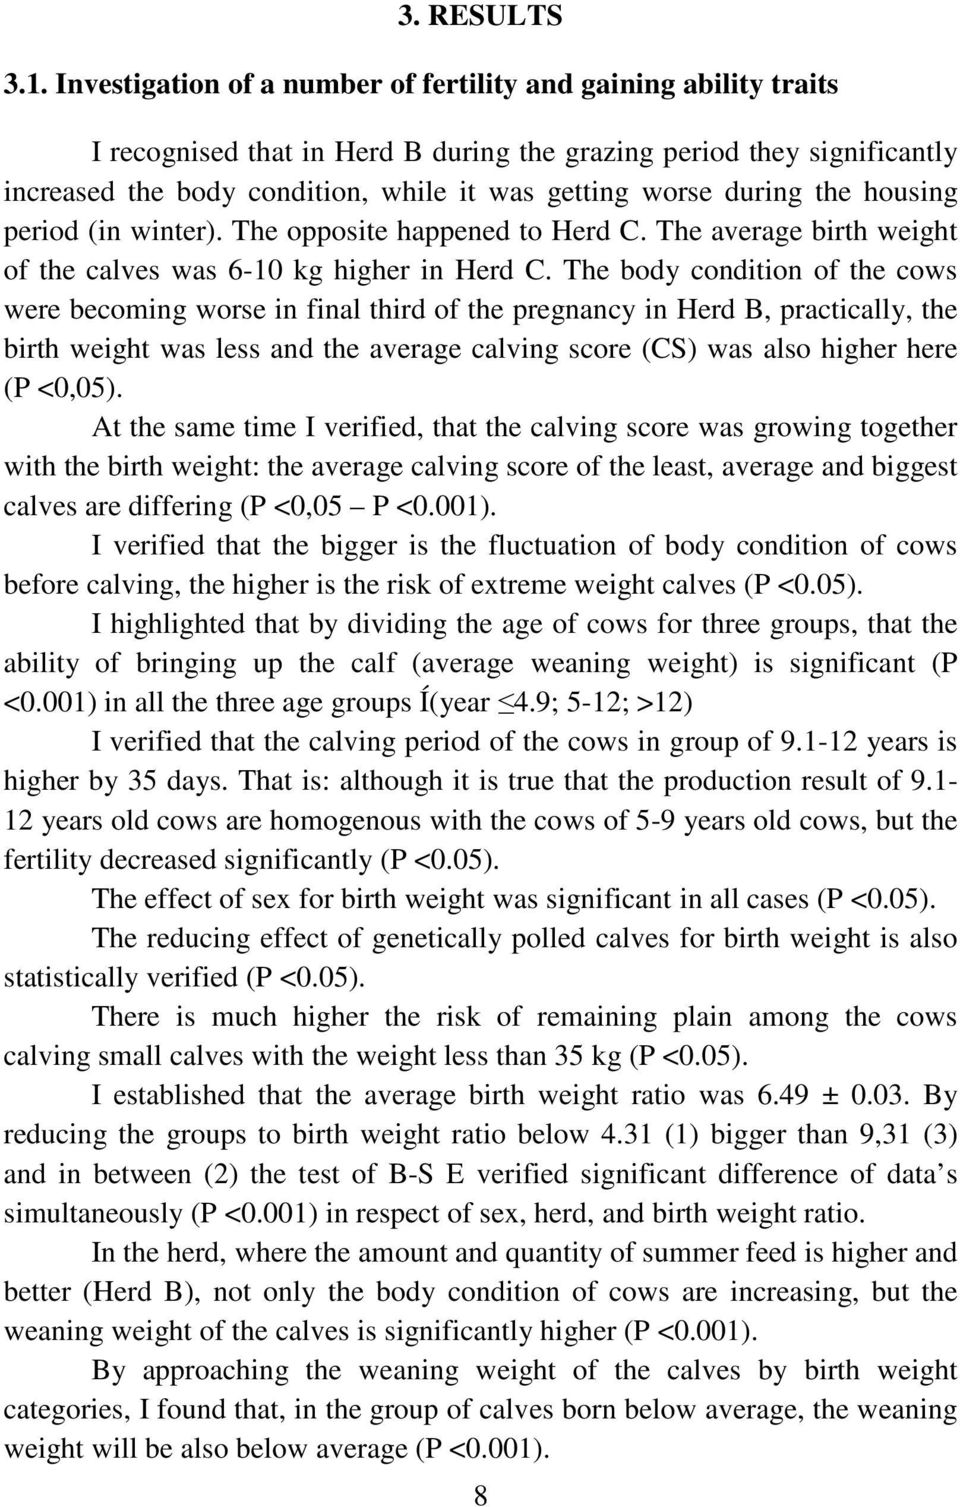 during the housing period (in winter). The opposite happened to Herd C. The average birth weight of the calves was 6-10 kg higher in Herd C.